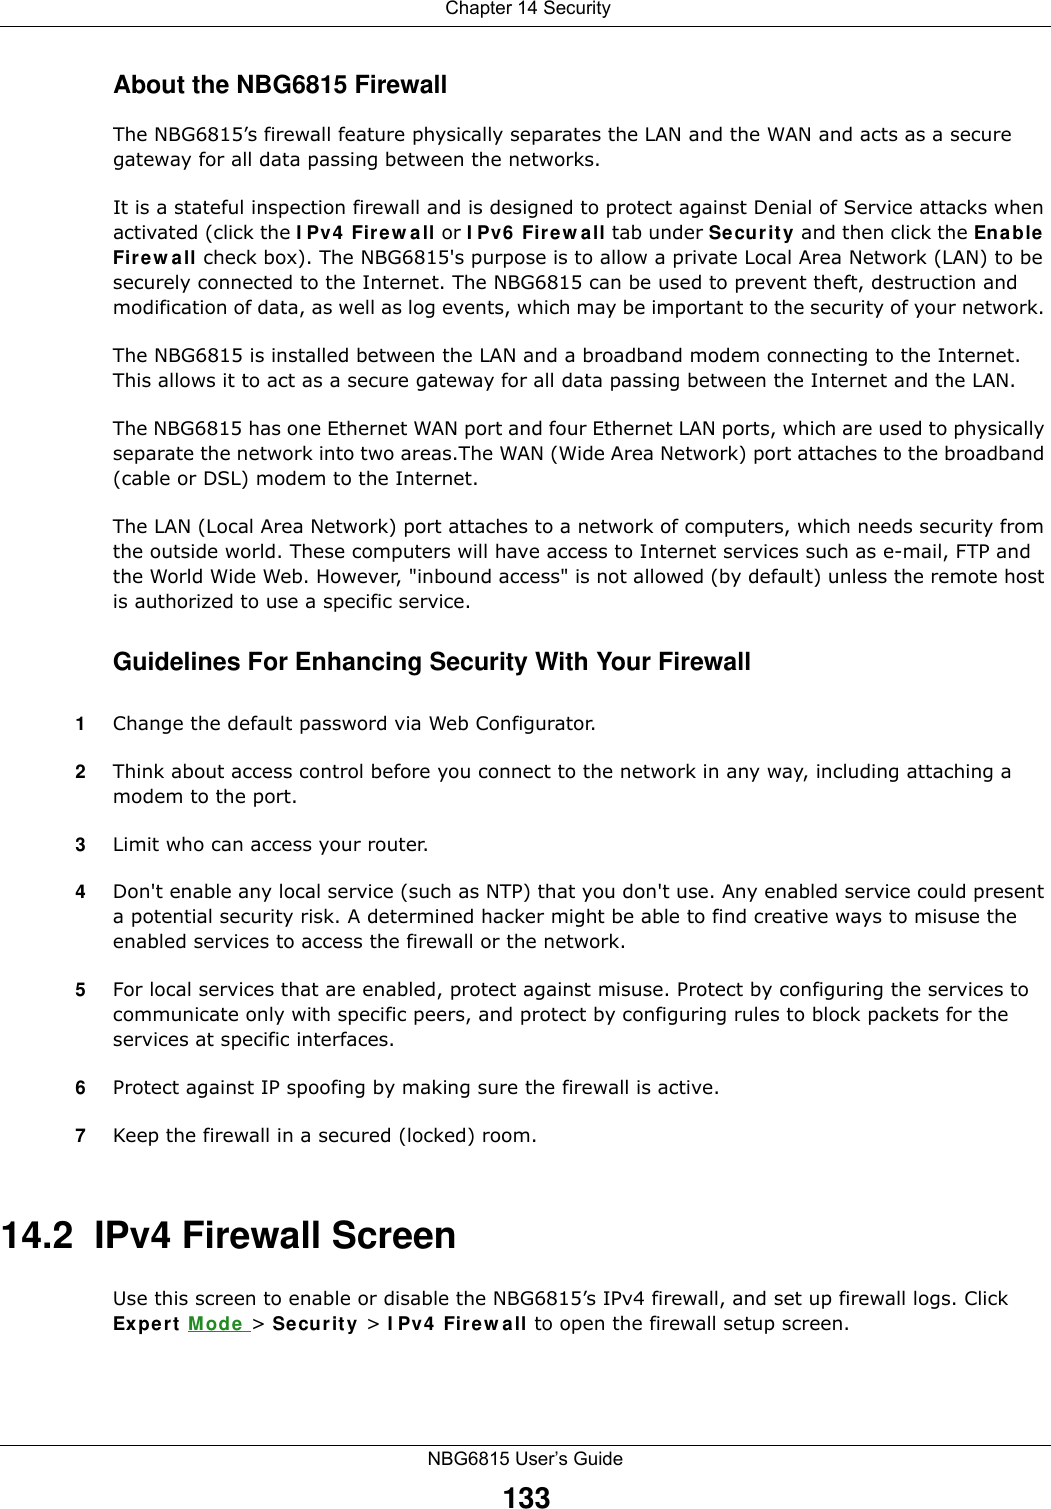  Chapter 14 SecurityNBG6815 User’s Guide133About the NBG6815 FirewallThe NBG6815’s firewall feature physically separates the LAN and the WAN and acts as a secure gateway for all data passing between the networks.It is a stateful inspection firewall and is designed to protect against Denial of Service attacks when activated (click the IPv4 Firewall or IPv6 Firewall tab under Security and then click the Enable Firewall check box). The NBG6815&apos;s purpose is to allow a private Local Area Network (LAN) to be securely connected to the Internet. The NBG6815 can be used to prevent theft, destruction and modification of data, as well as log events, which may be important to the security of your network. The NBG6815 is installed between the LAN and a broadband modem connecting to the Internet. This allows it to act as a secure gateway for all data passing between the Internet and the LAN.The NBG6815 has one Ethernet WAN port and four Ethernet LAN ports, which are used to physically separate the network into two areas.The WAN (Wide Area Network) port attaches to the broadband (cable or DSL) modem to the Internet.The LAN (Local Area Network) port attaches to a network of computers, which needs security from the outside world. These computers will have access to Internet services such as e-mail, FTP and the World Wide Web. However, &quot;inbound access&quot; is not allowed (by default) unless the remote host is authorized to use a specific service.Guidelines For Enhancing Security With Your Firewall1Change the default password via Web Configurator. 2Think about access control before you connect to the network in any way, including attaching a modem to the port. 3Limit who can access your router. 4Don&apos;t enable any local service (such as NTP) that you don&apos;t use. Any enabled service could present a potential security risk. A determined hacker might be able to find creative ways to misuse the enabled services to access the firewall or the network. 5For local services that are enabled, protect against misuse. Protect by configuring the services to communicate only with specific peers, and protect by configuring rules to block packets for the services at specific interfaces. 6Protect against IP spoofing by making sure the firewall is active. 7Keep the firewall in a secured (locked) room. 14.2  IPv4 Firewall Screen   Use this screen to enable or disable the NBG6815’s IPv4 firewall, and set up firewall logs. Click Expert Mode &gt; Security &gt; IPv4 Firewall to open the firewall setup screen.